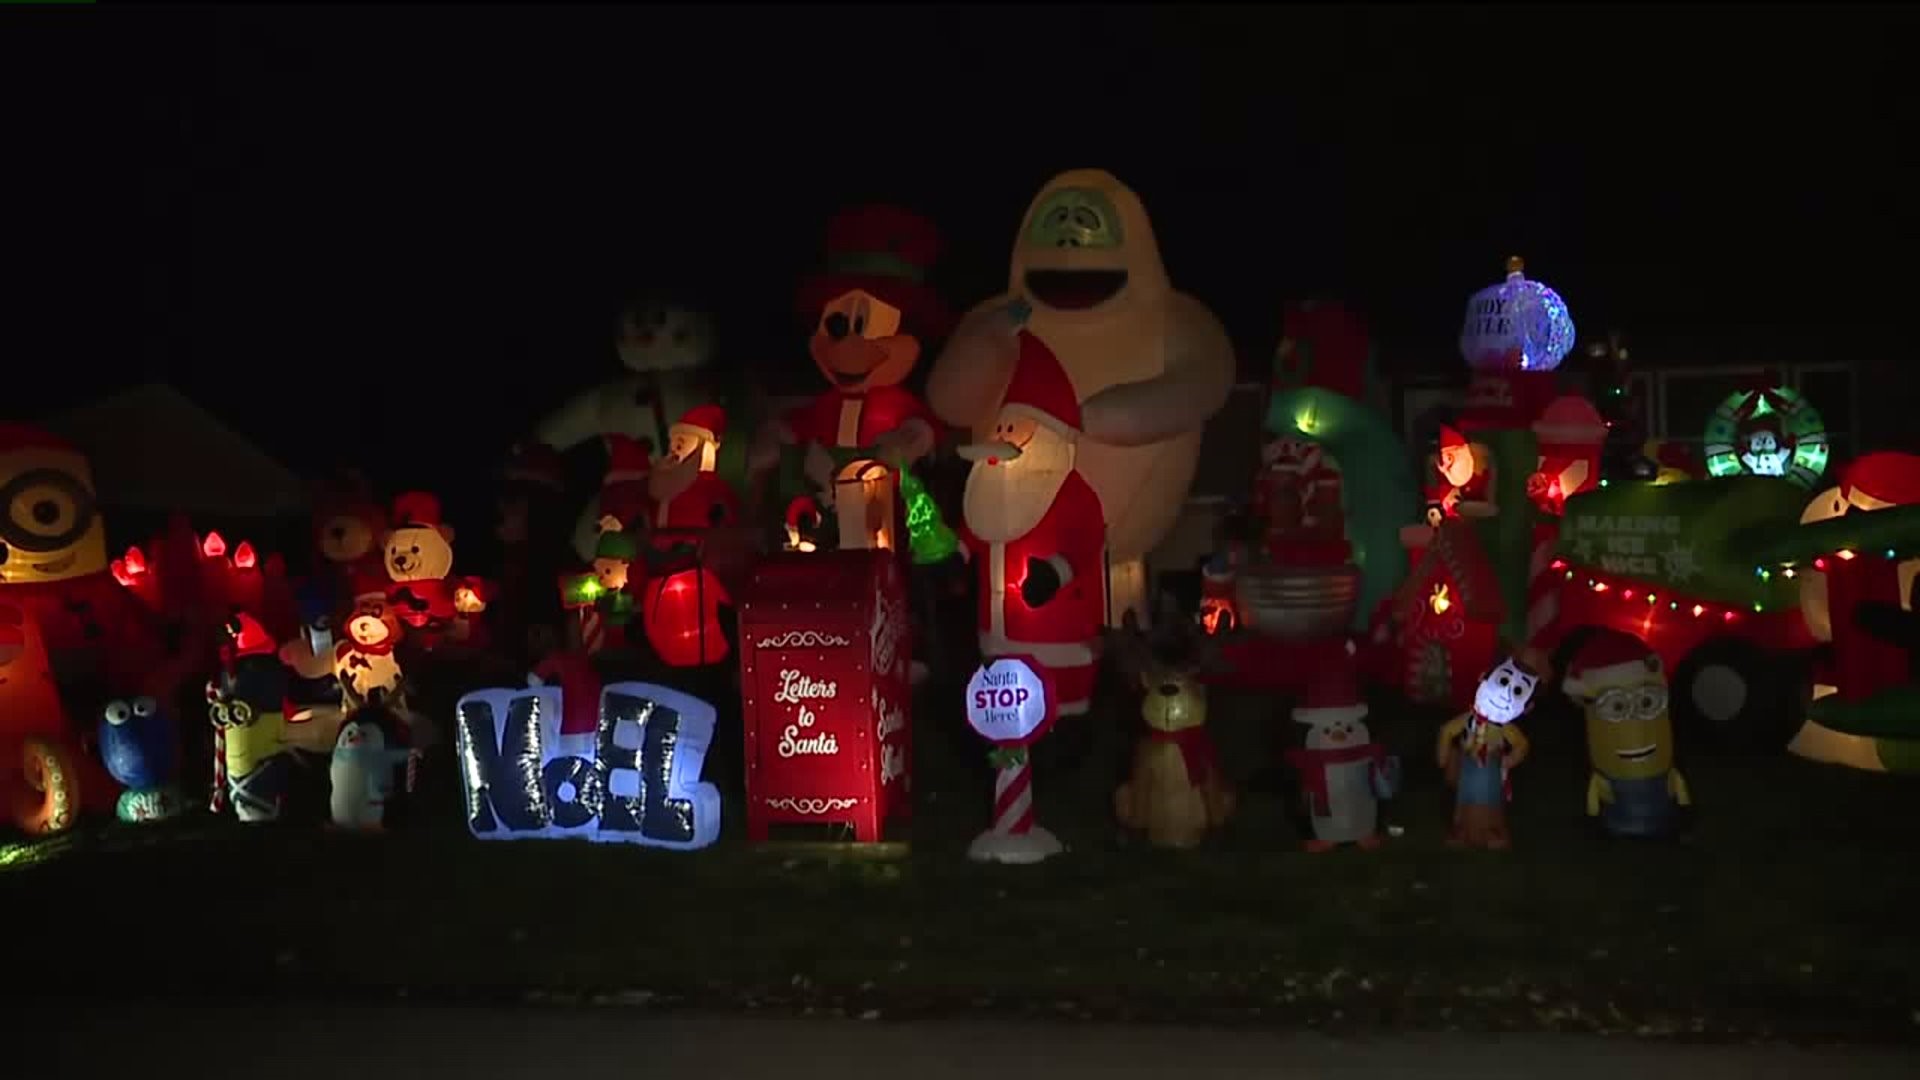 Coal Valley couple takes holiday decorating to a whole new level